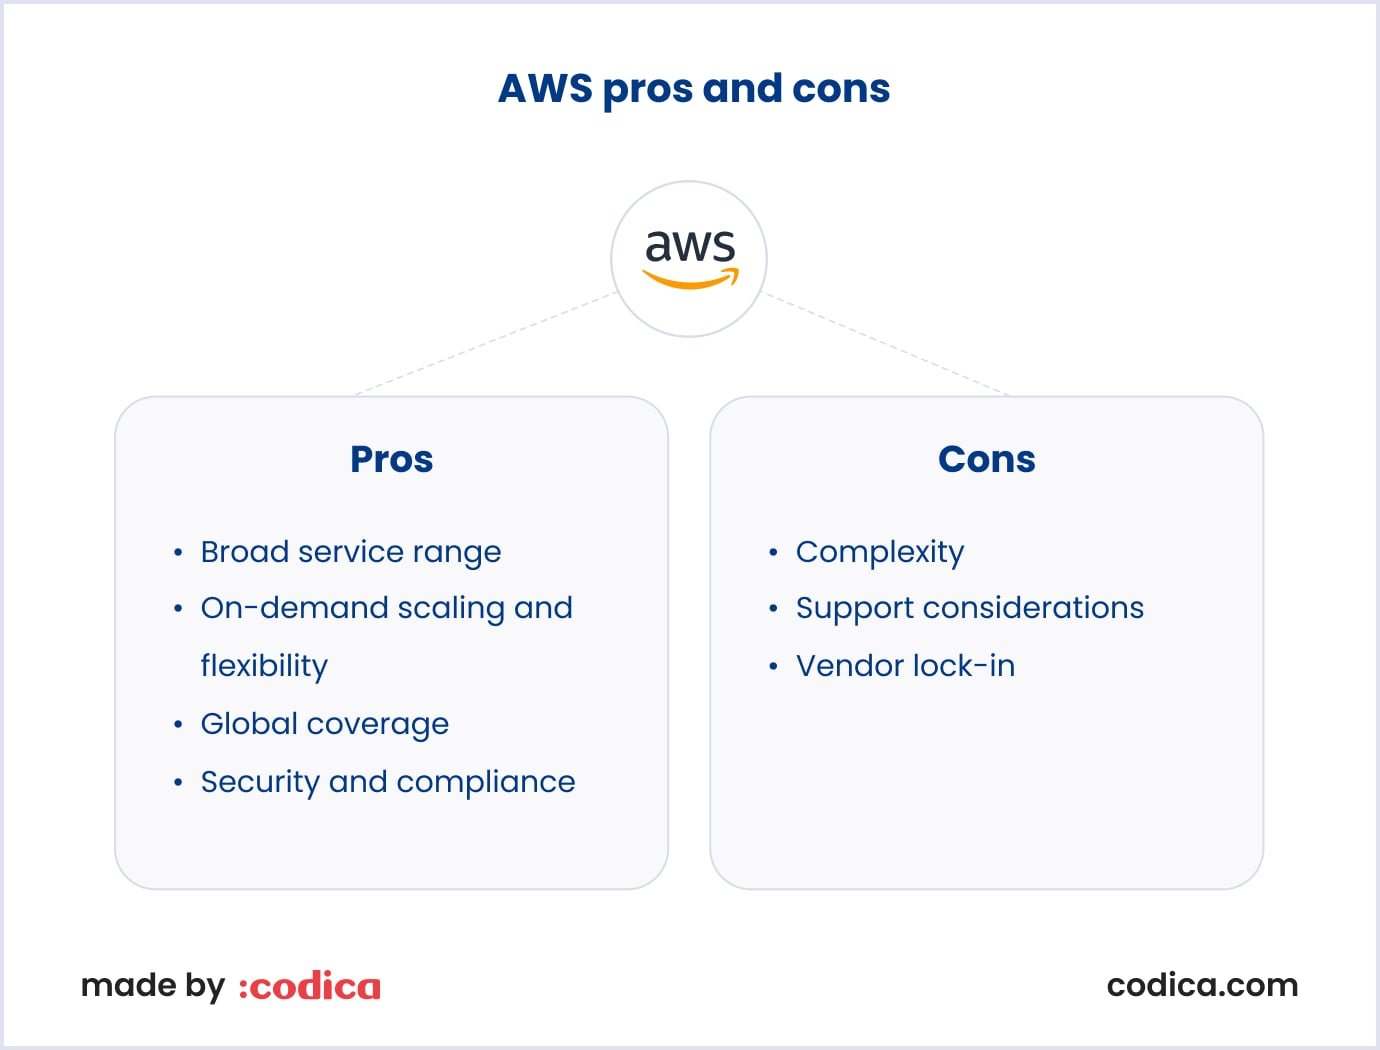 Amazon Web Services pros and cons